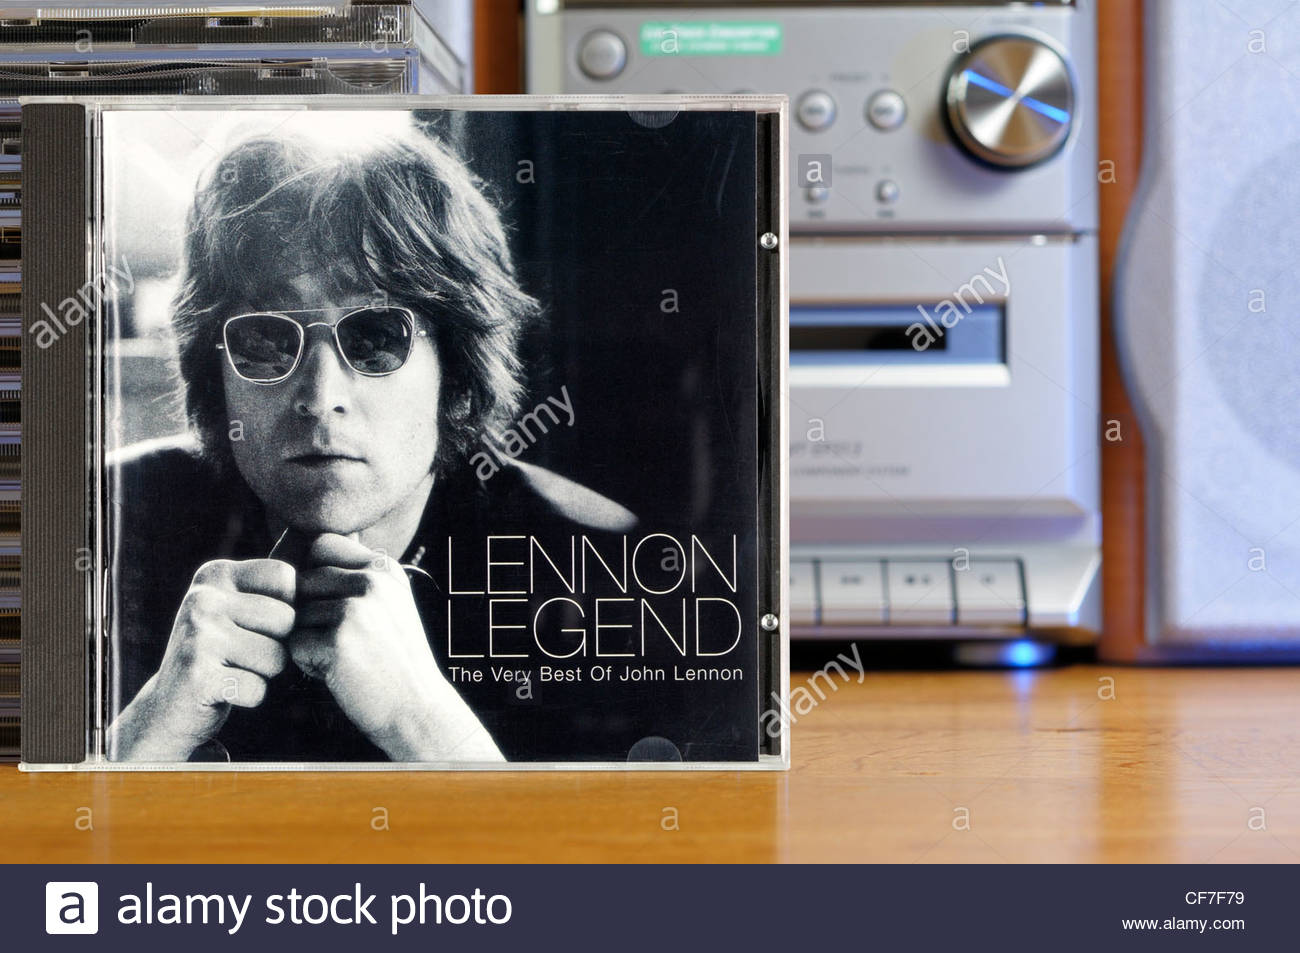 John Lennon Legend album case in front of a CD player, England Stock Photo  - Alamy